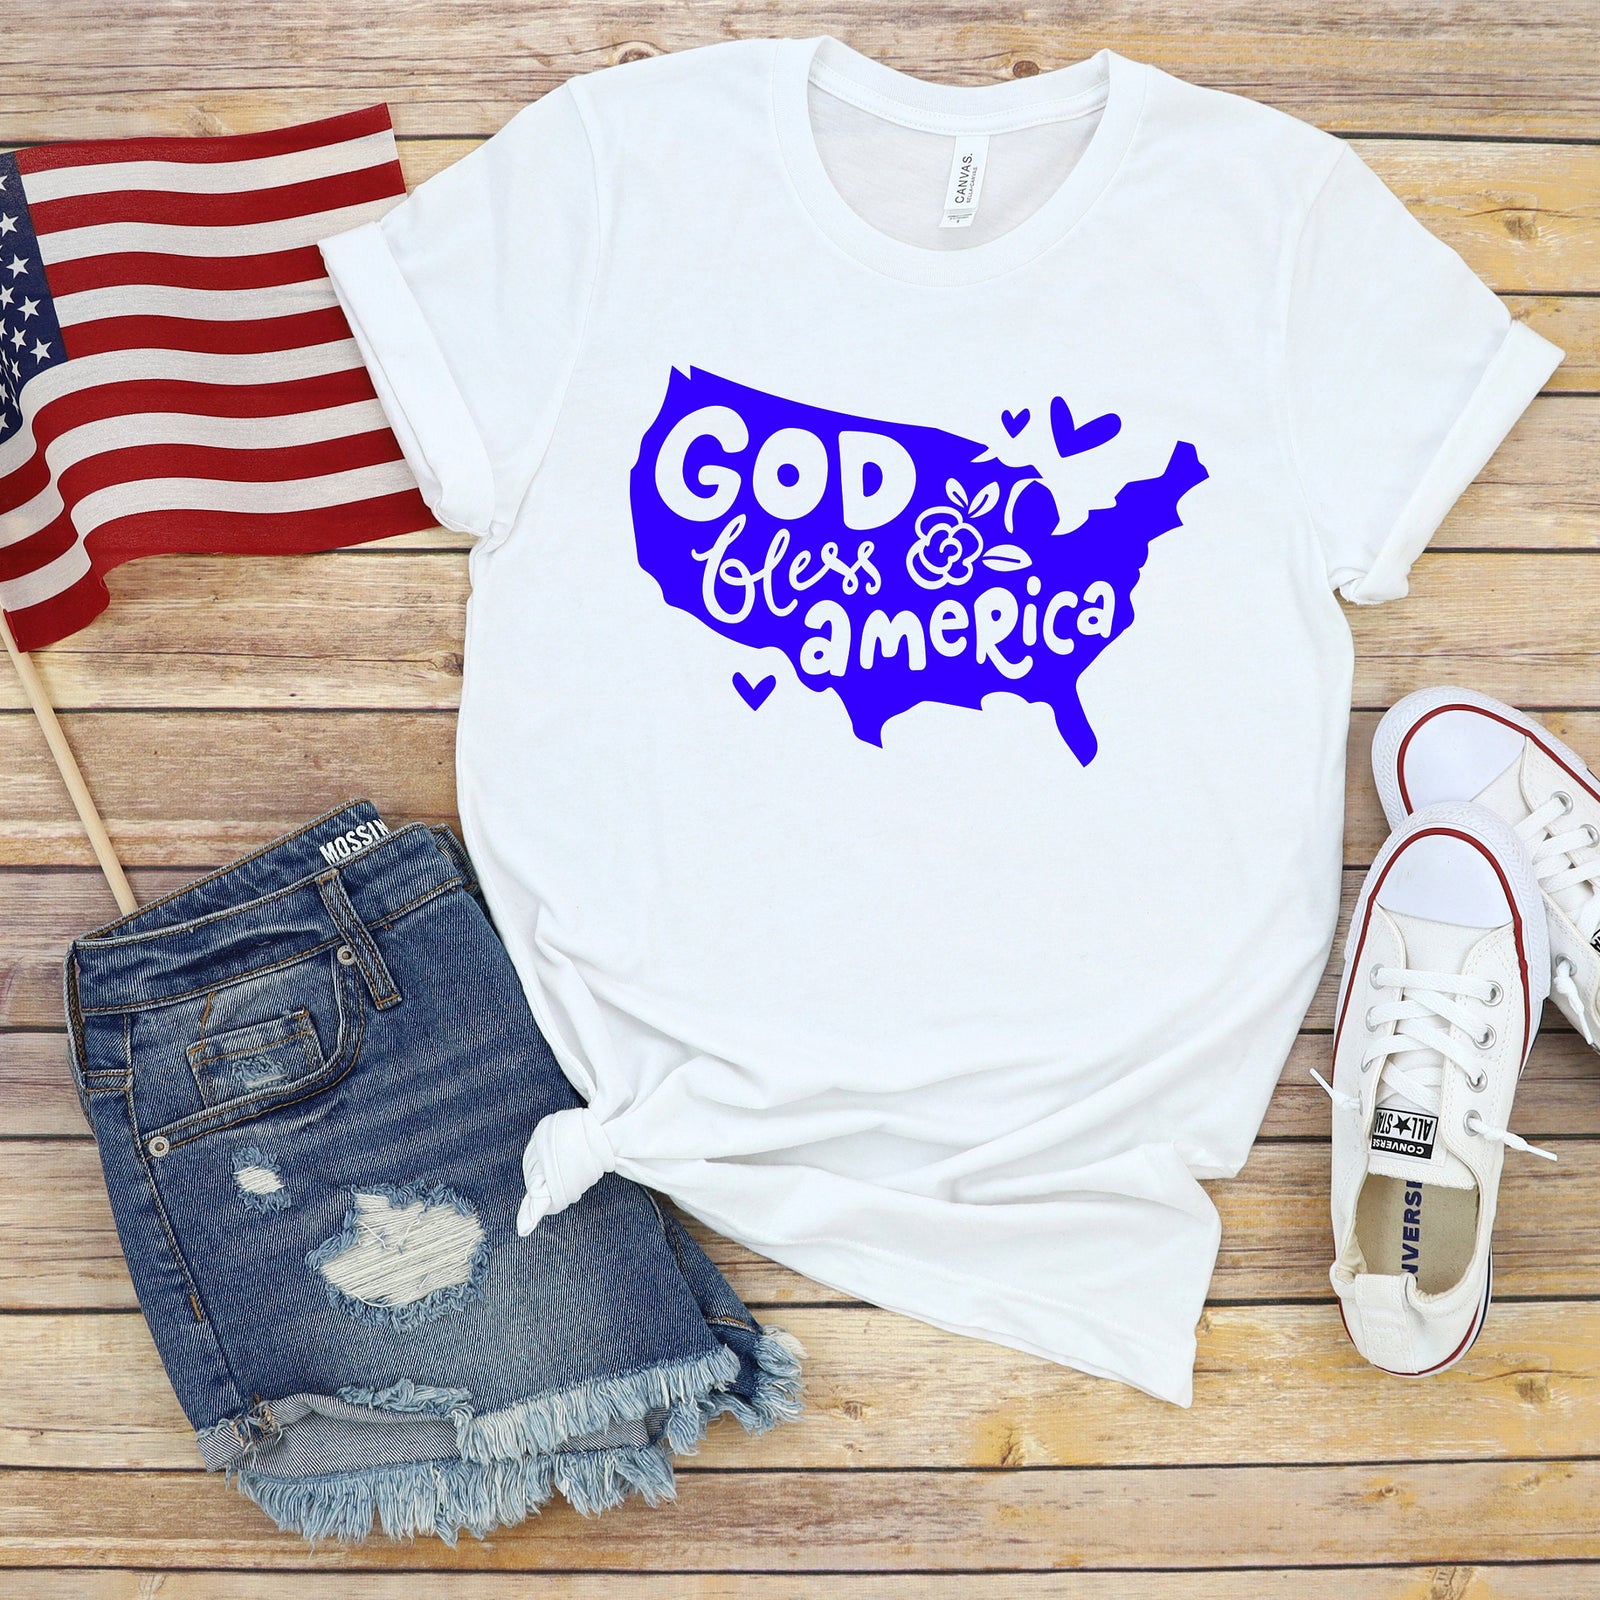 God Bless America Map - Fourth of July Adult T Shirt - Independence Day - Memorial - Red White and Blue USA